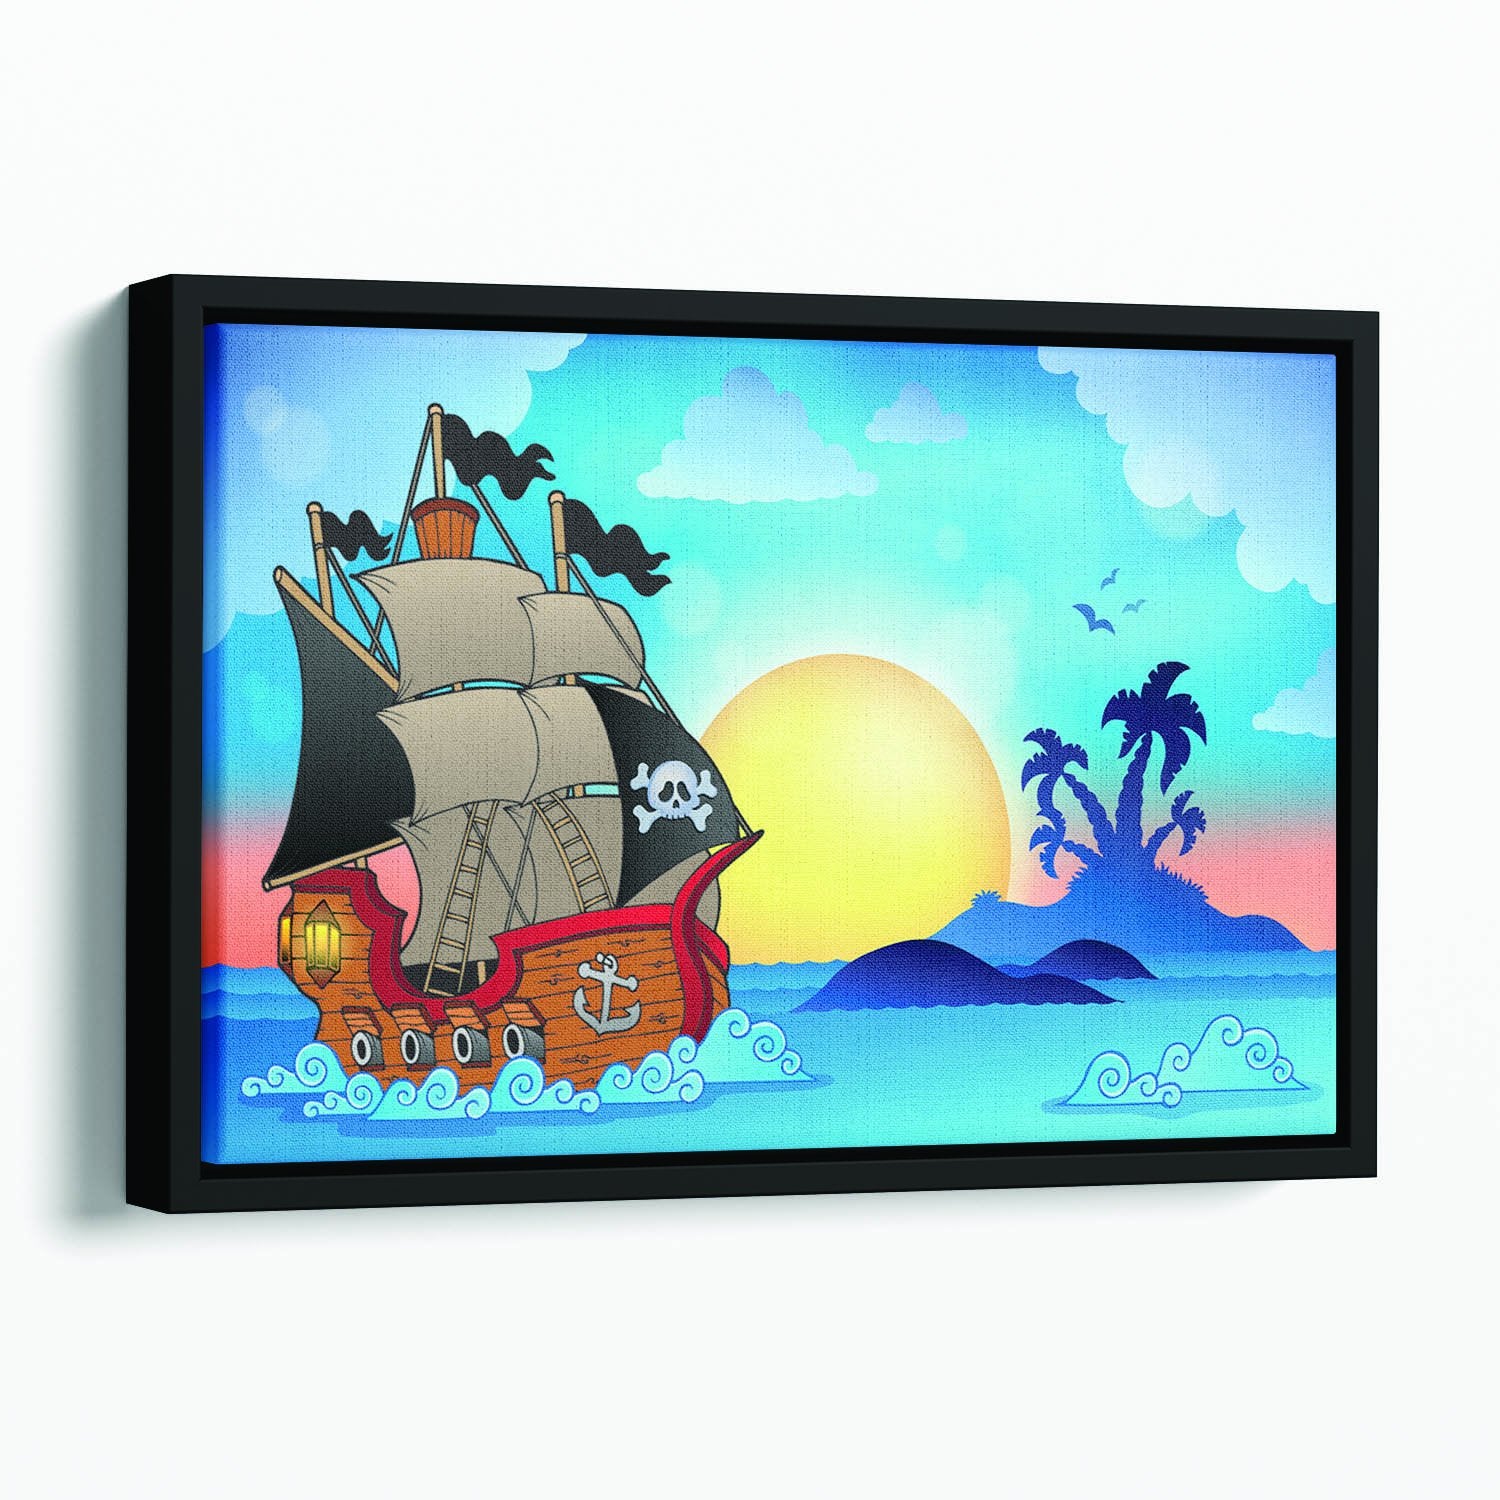 Pirate ship near small island Floating Framed Canvas